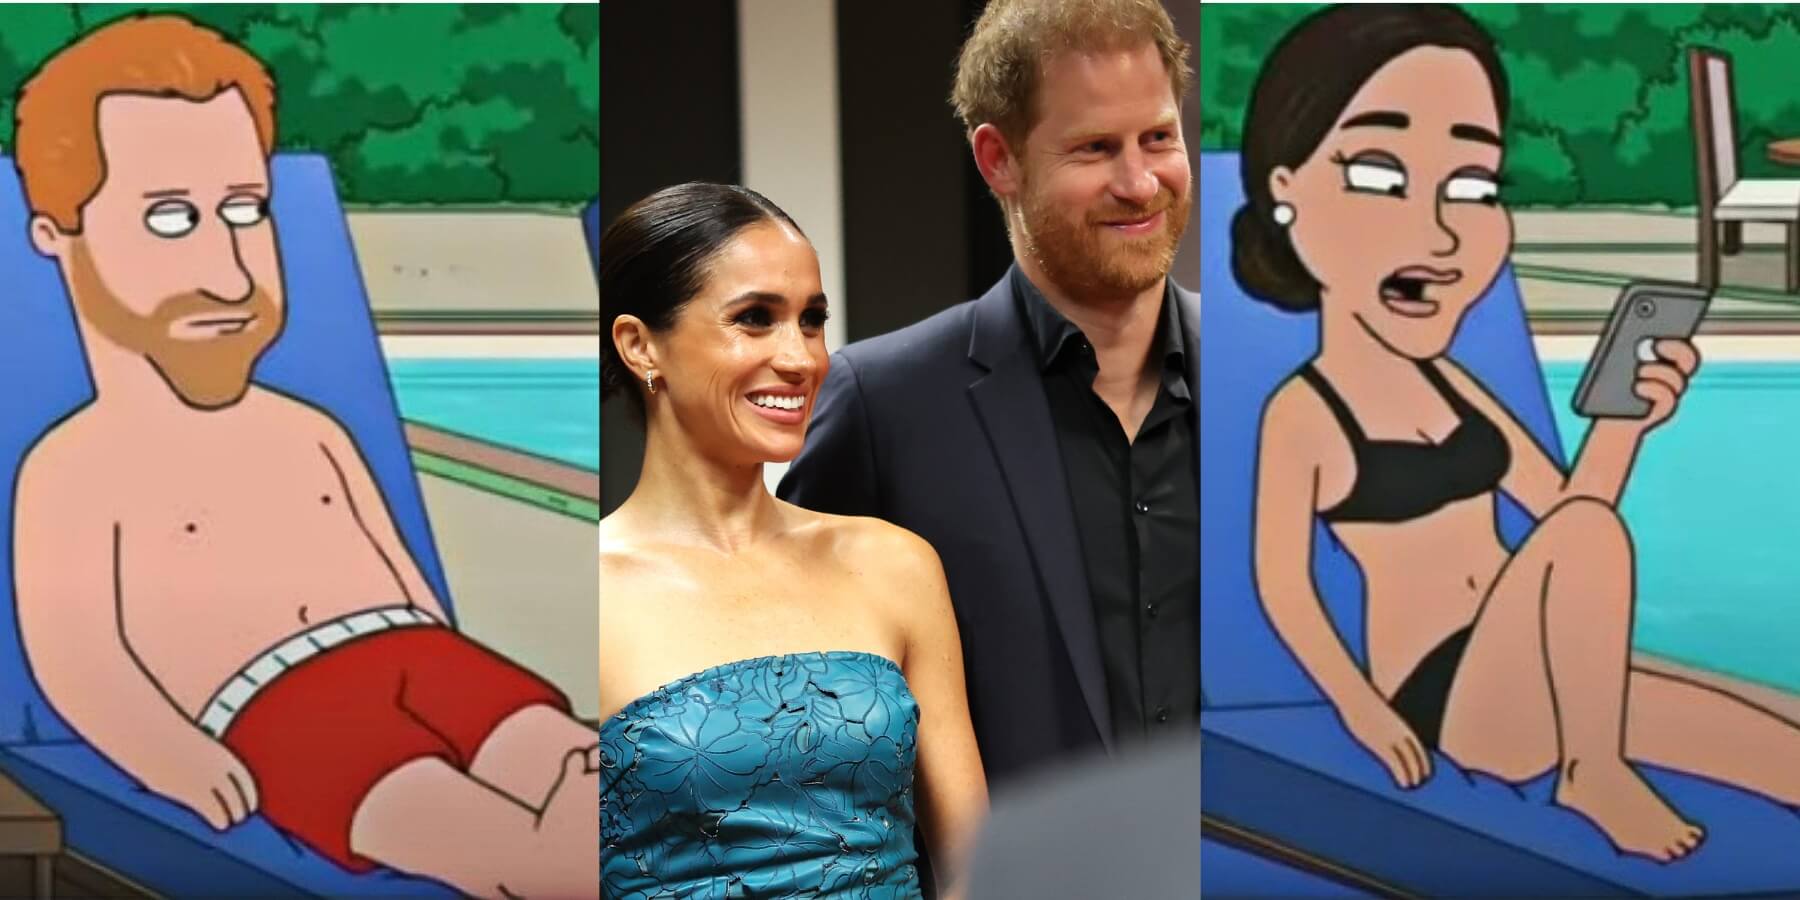 Prince Harry and Meghan Markle as depicted on season 22 of 'Family Guy' alongside the couple's 2023 appearance at the Invictus Games.